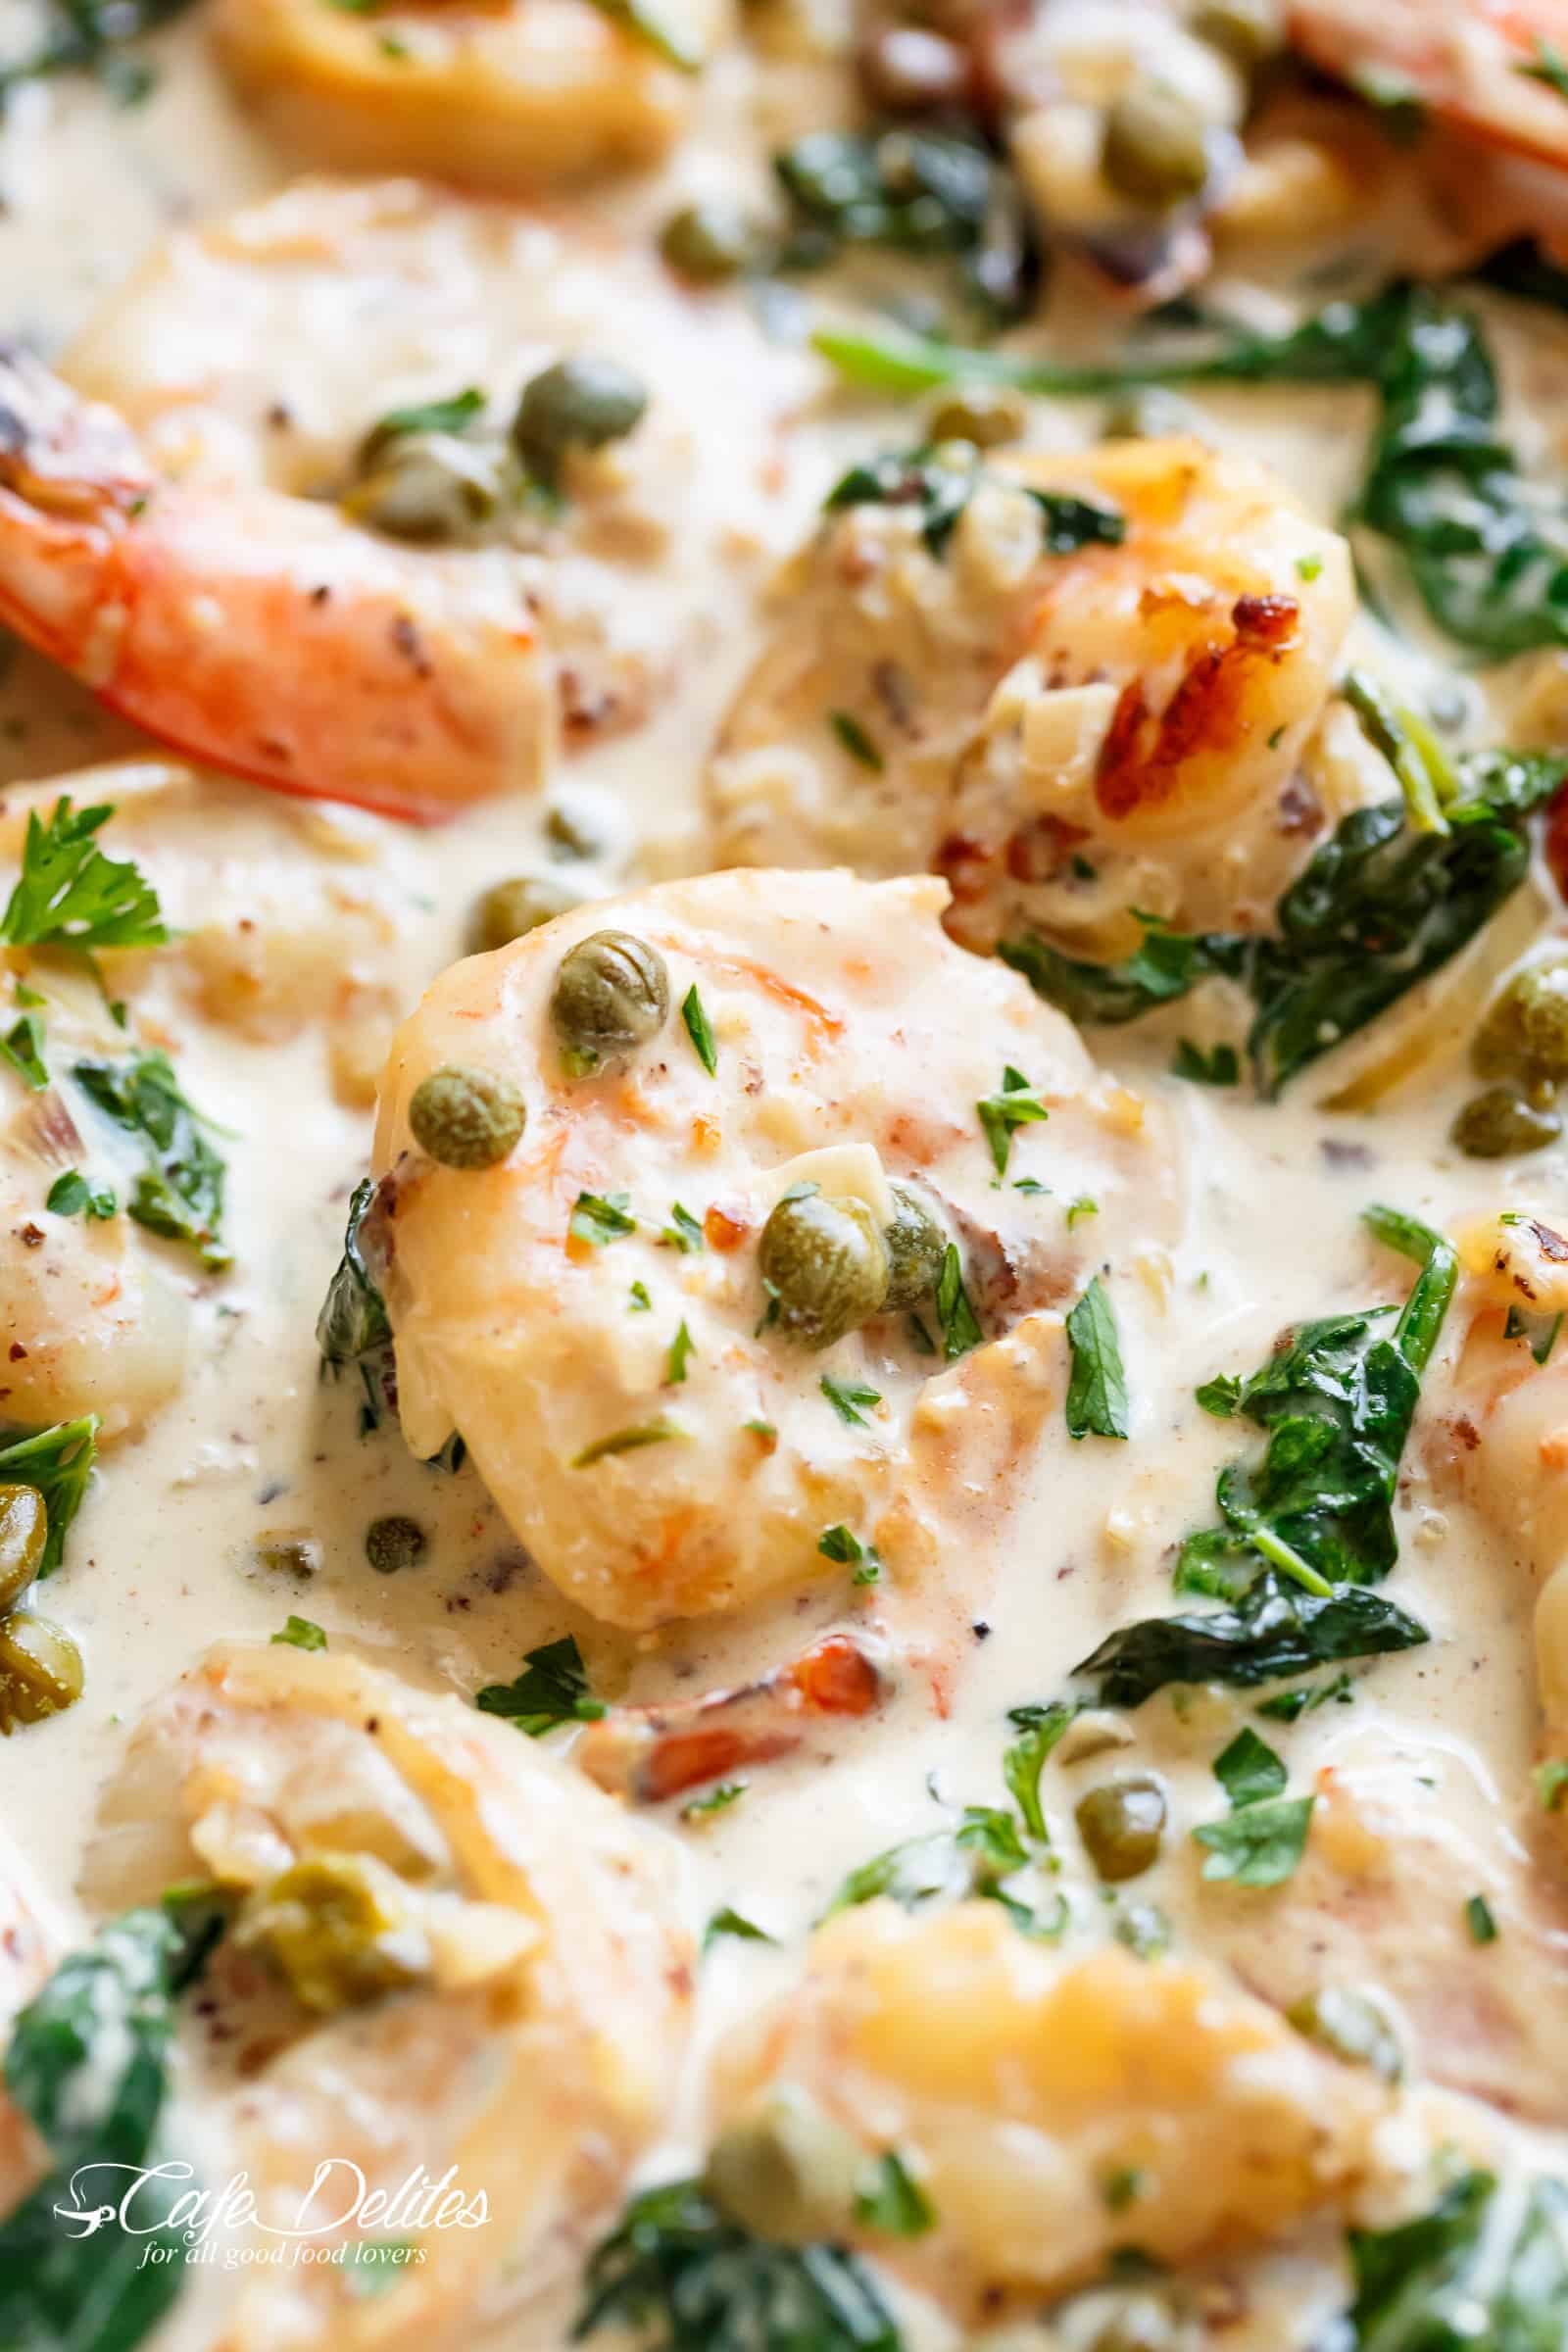 Creamy Garlic Butter Shrimp Piccata is the recipe of your dreams! Garlic butter shrimp coated in a rustic creamy garlic parmesan sauce with a hint of lemon, capers and spinach! Leave people wondering if there is a hidden chef in your kitchen! Quick and easy to make, ready on the table in less than 15 minutes! | cafedelites.com